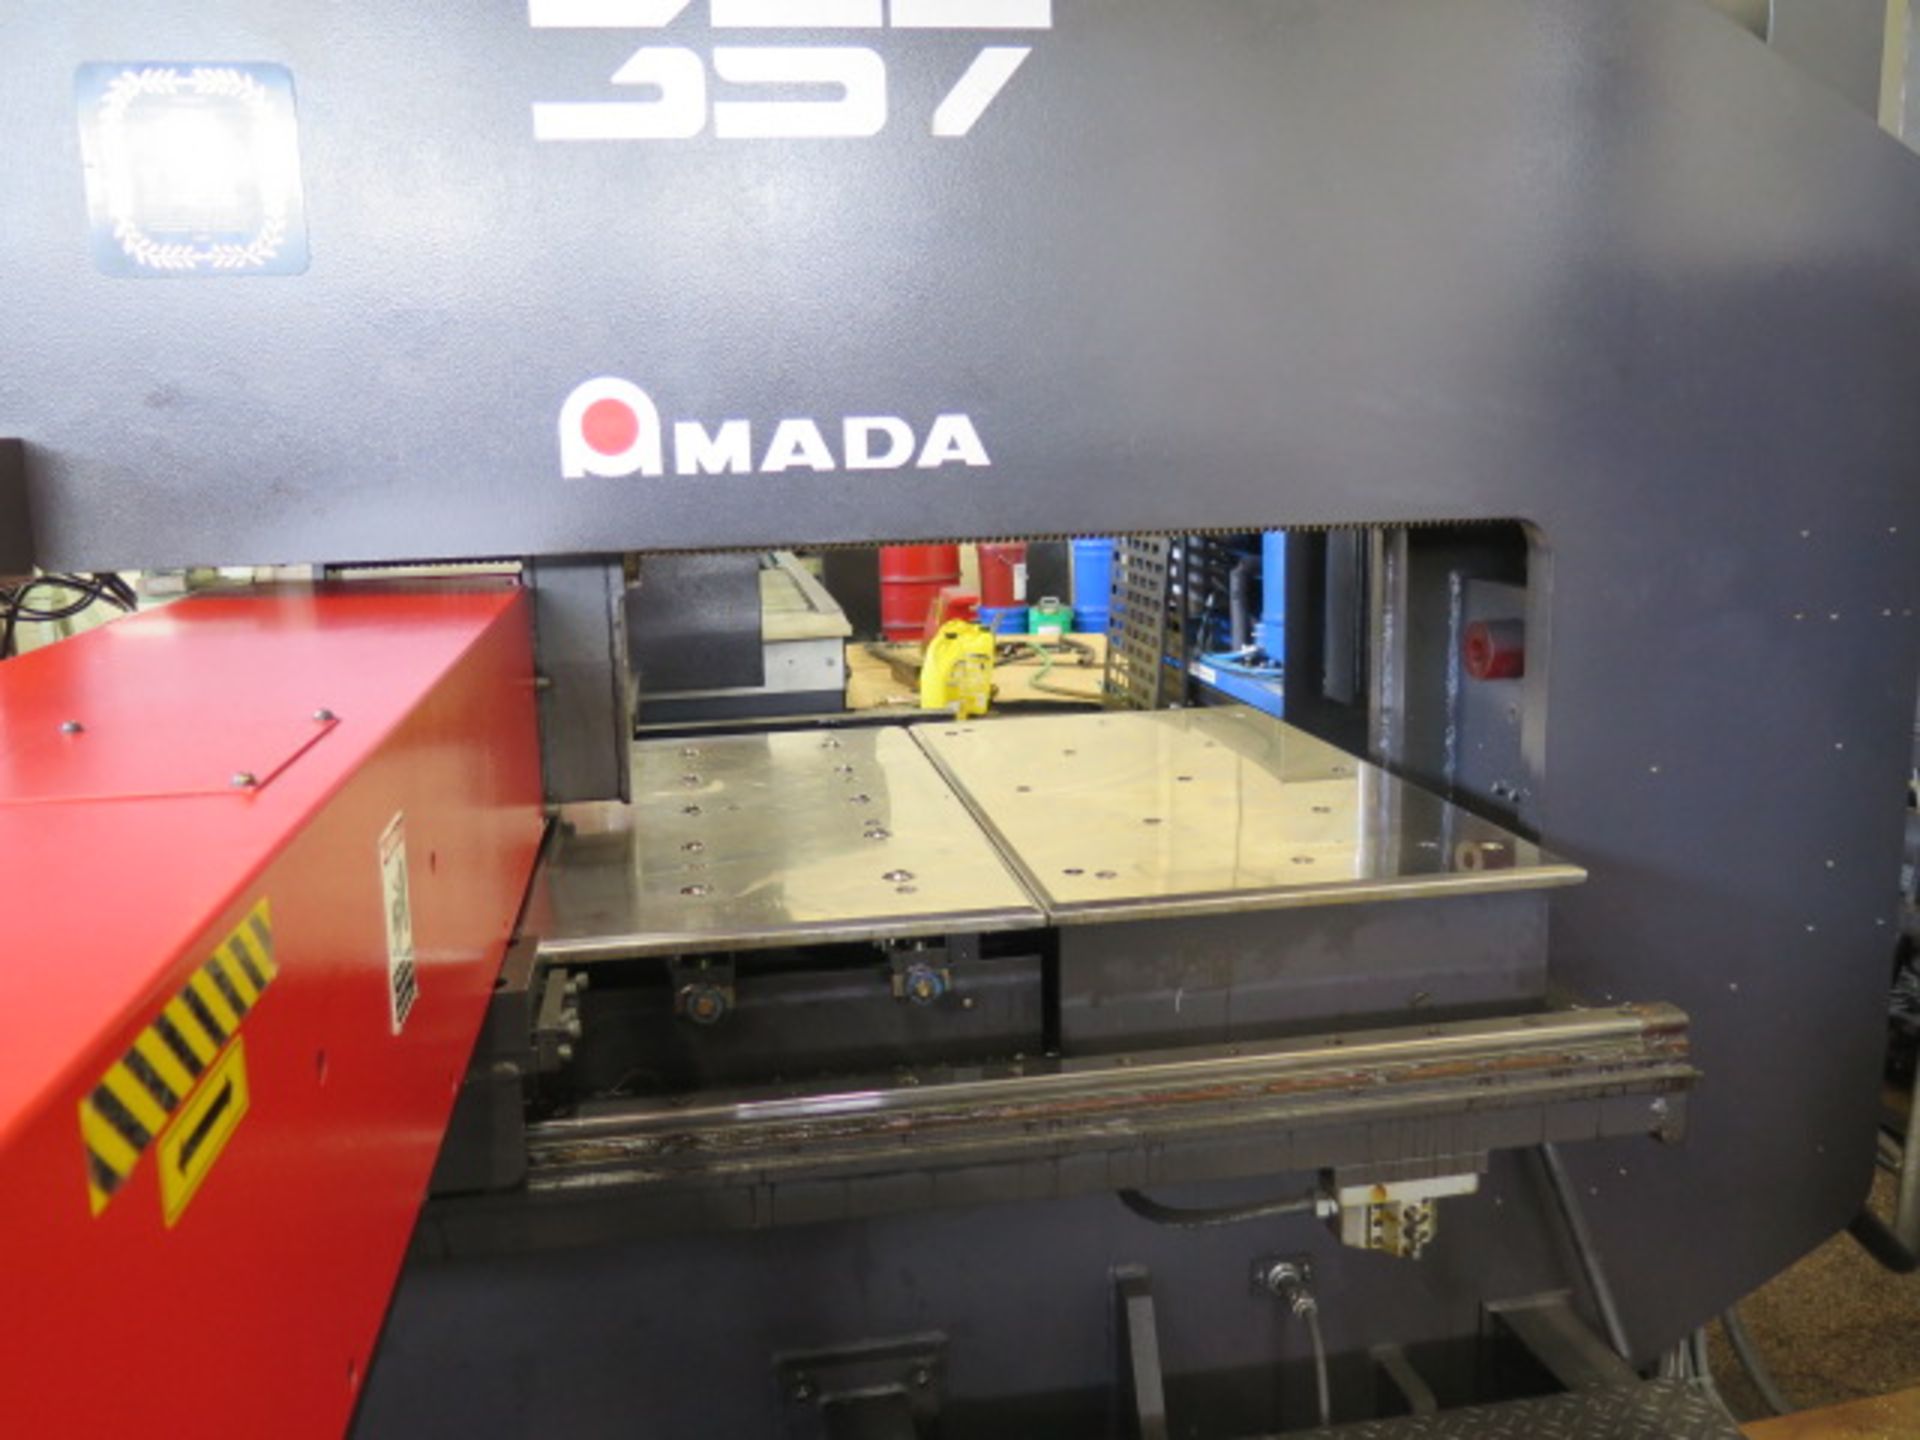 Amada VIPROS 357 30-Ton CNC Turret Punch Cell s/n 35710664 w/ 04P-C Controls, 58-Station, SOLD AS IS - Image 6 of 37